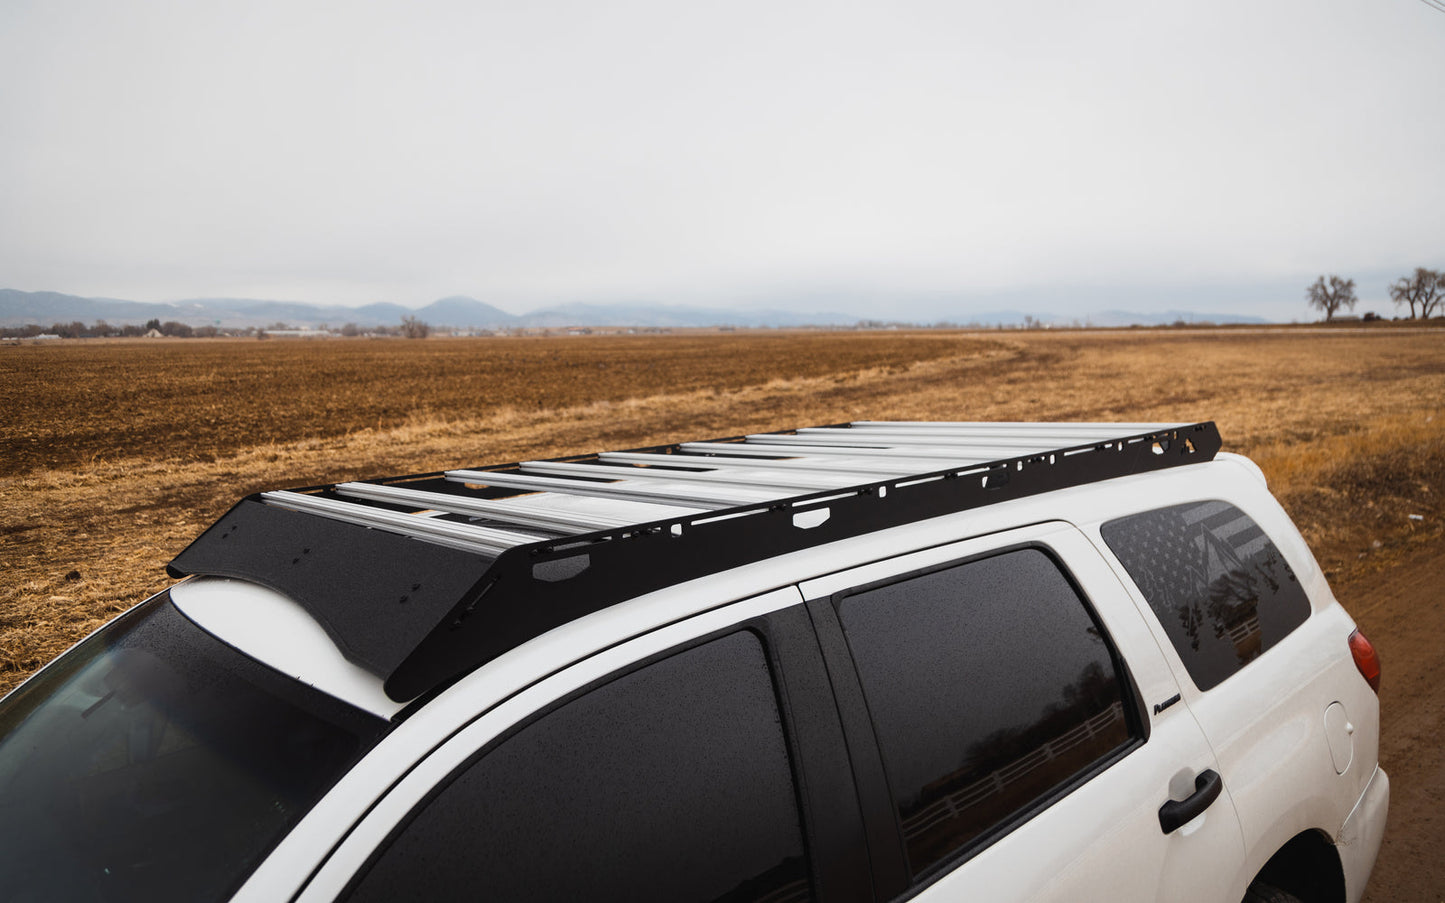 The Harvard Roof Rack Toyota Sequoia (2008 - 2022) - by Sherpa